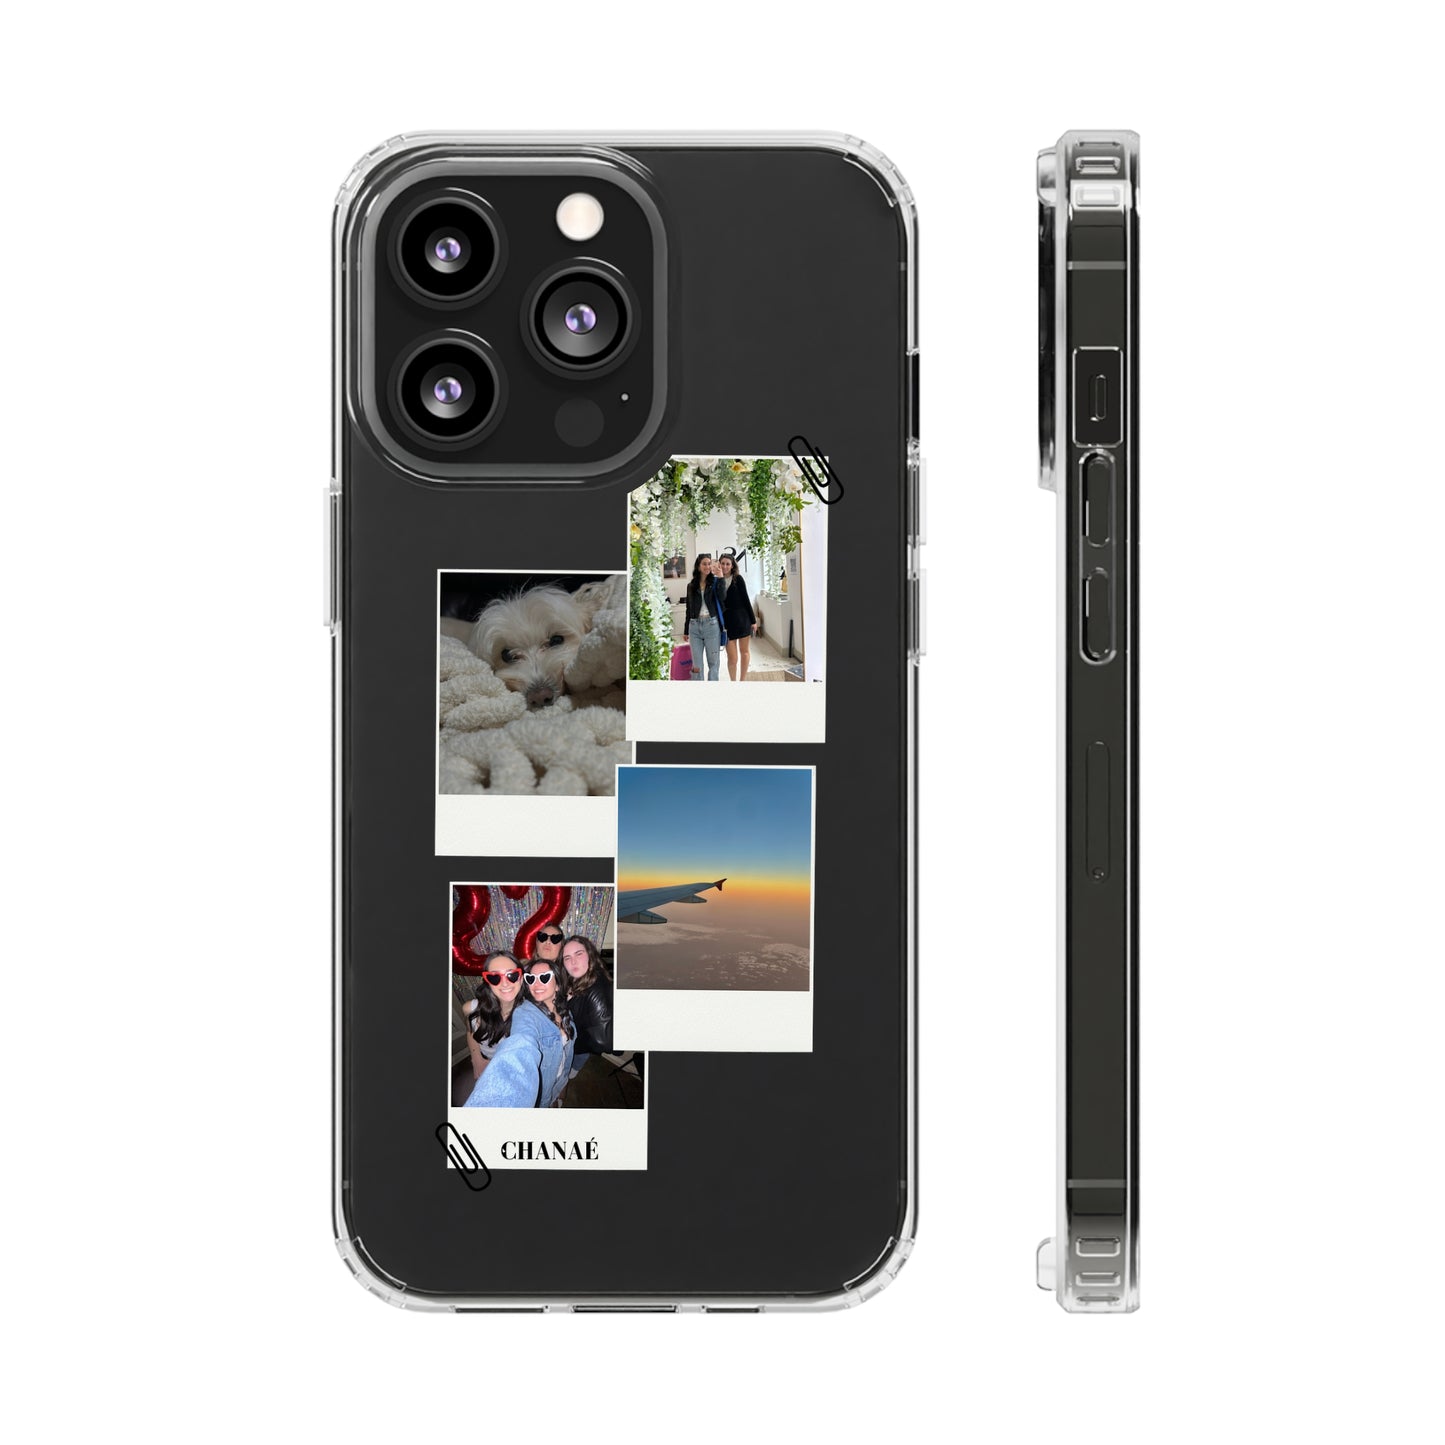 Customisable FujiFilm Collage Clear Case